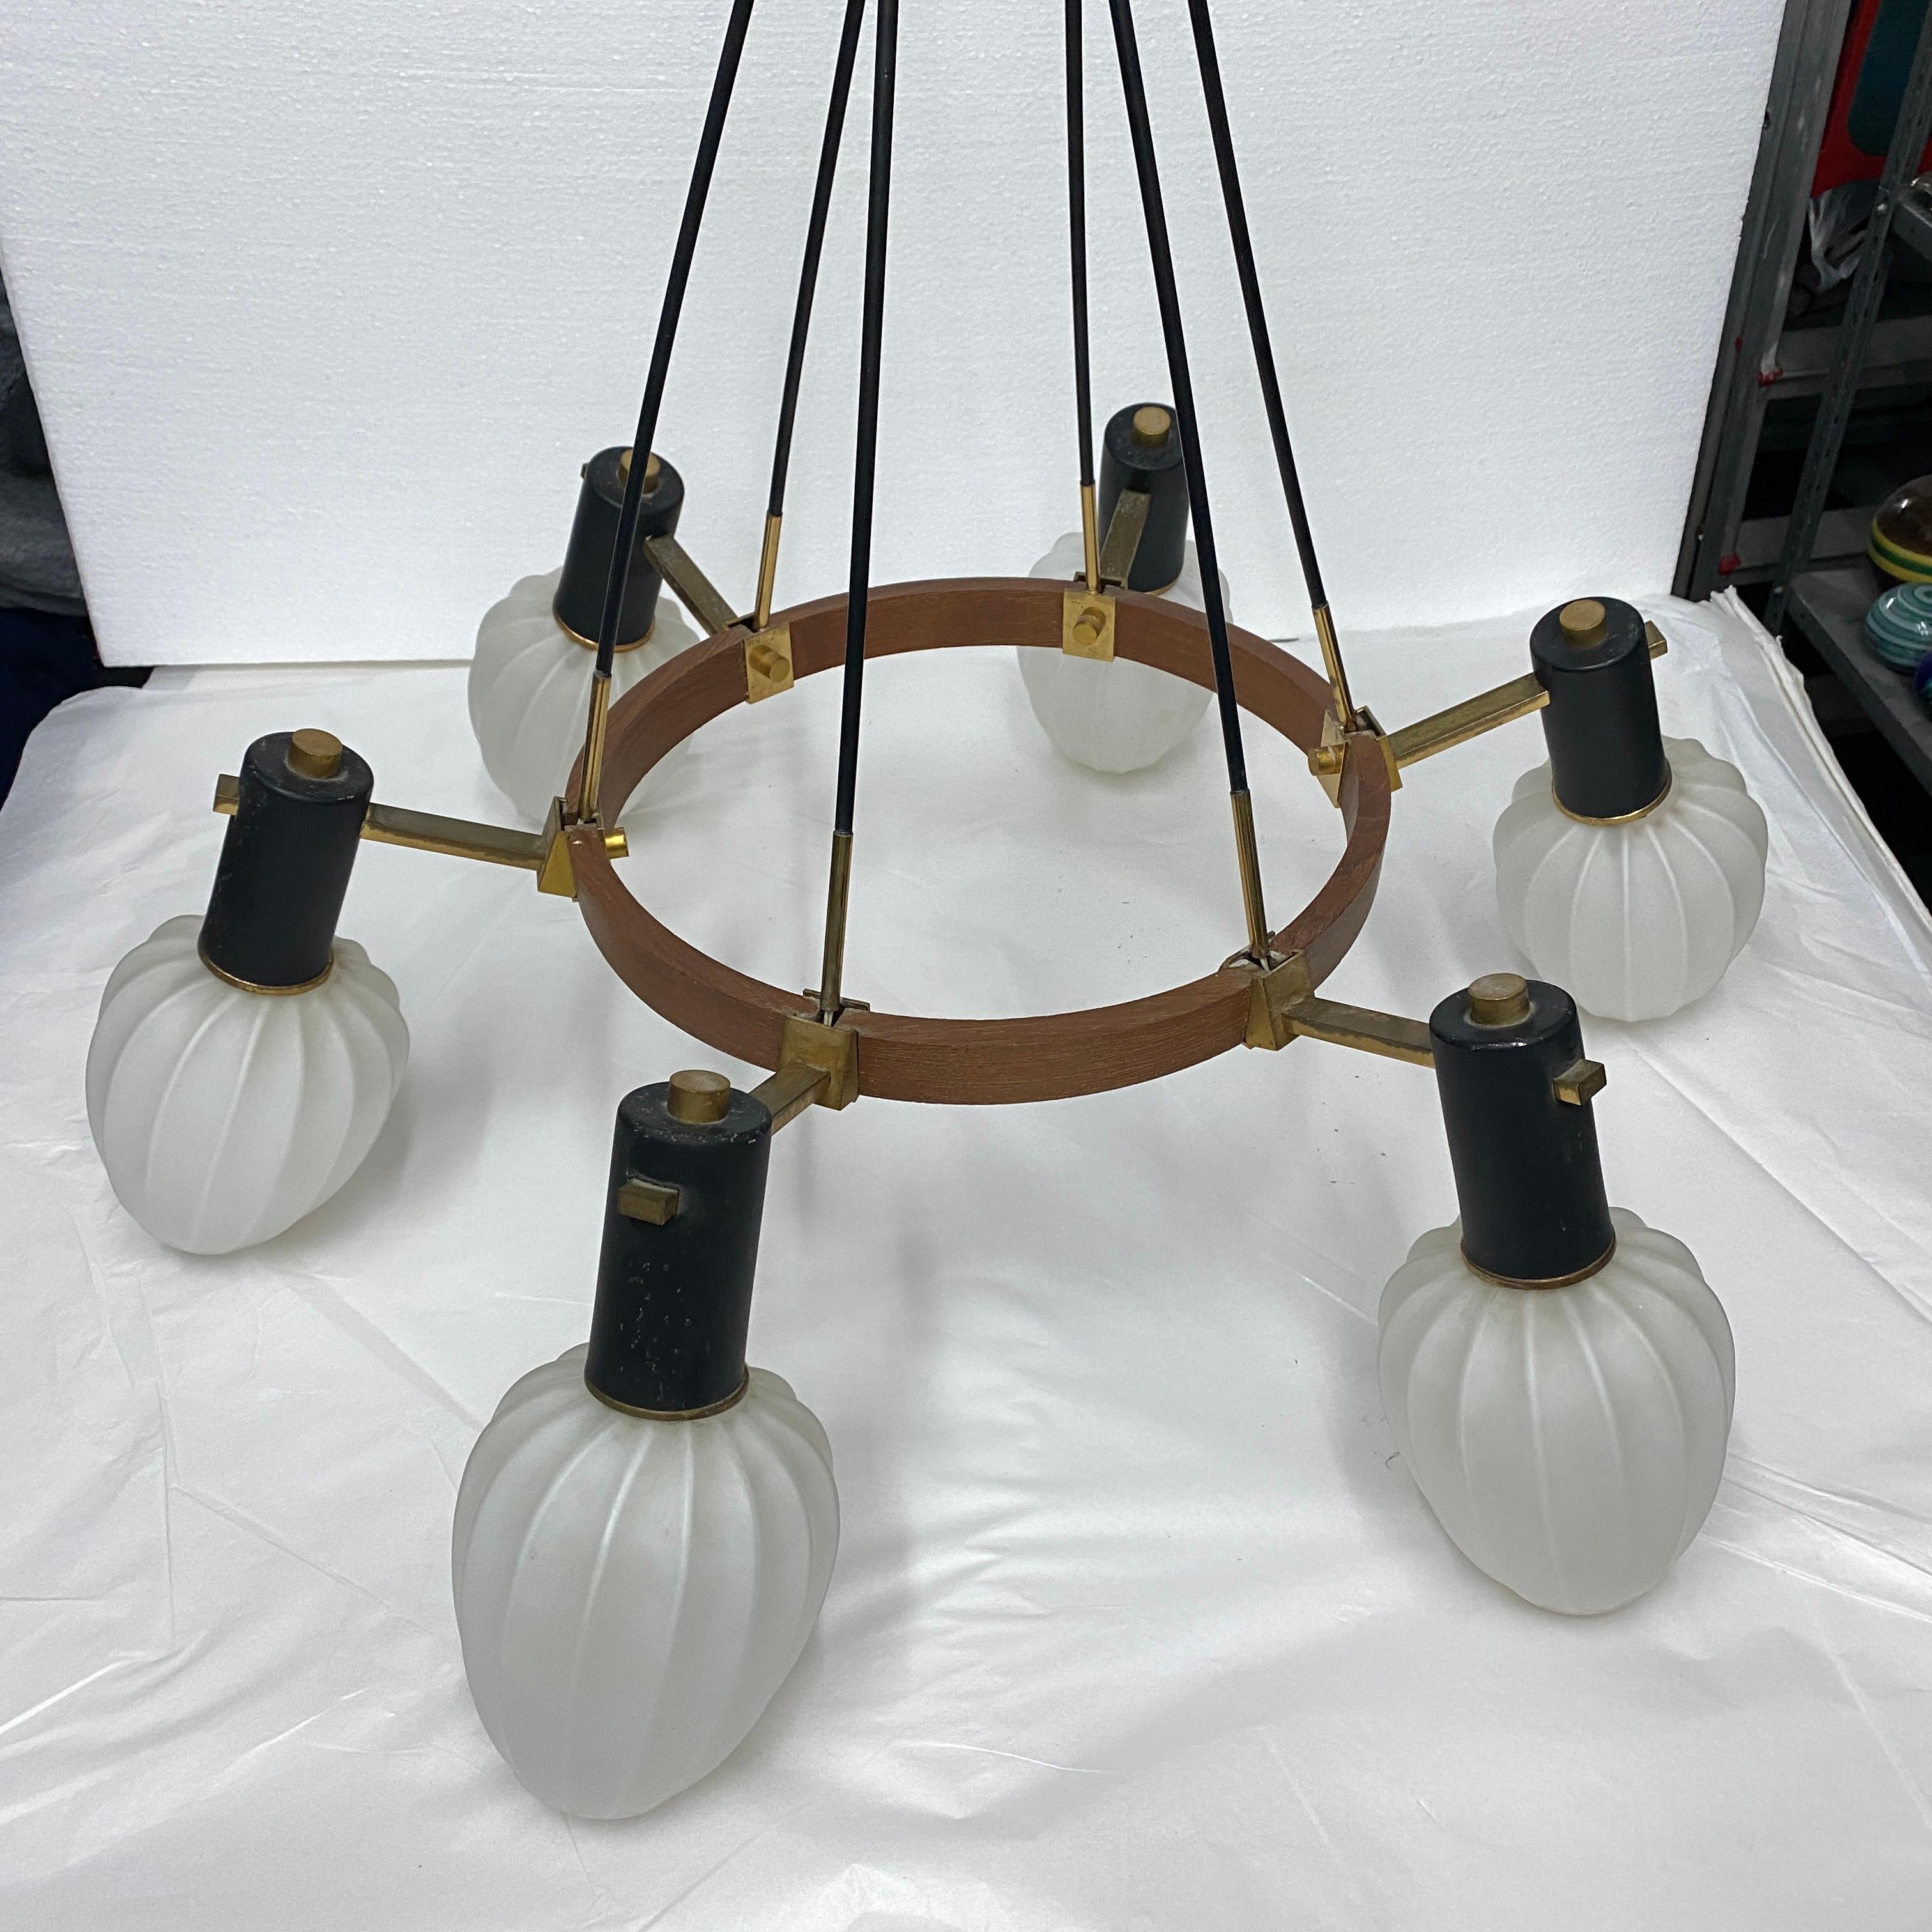 An elegant chandelier designed and manufactured in Italy in the Sixties in the manner of stilnovo. the round teak structure holds six brass and white opaline glass diffusors, it needs 6 regular e14 bulbs and works both 110-240 volts. It's in very